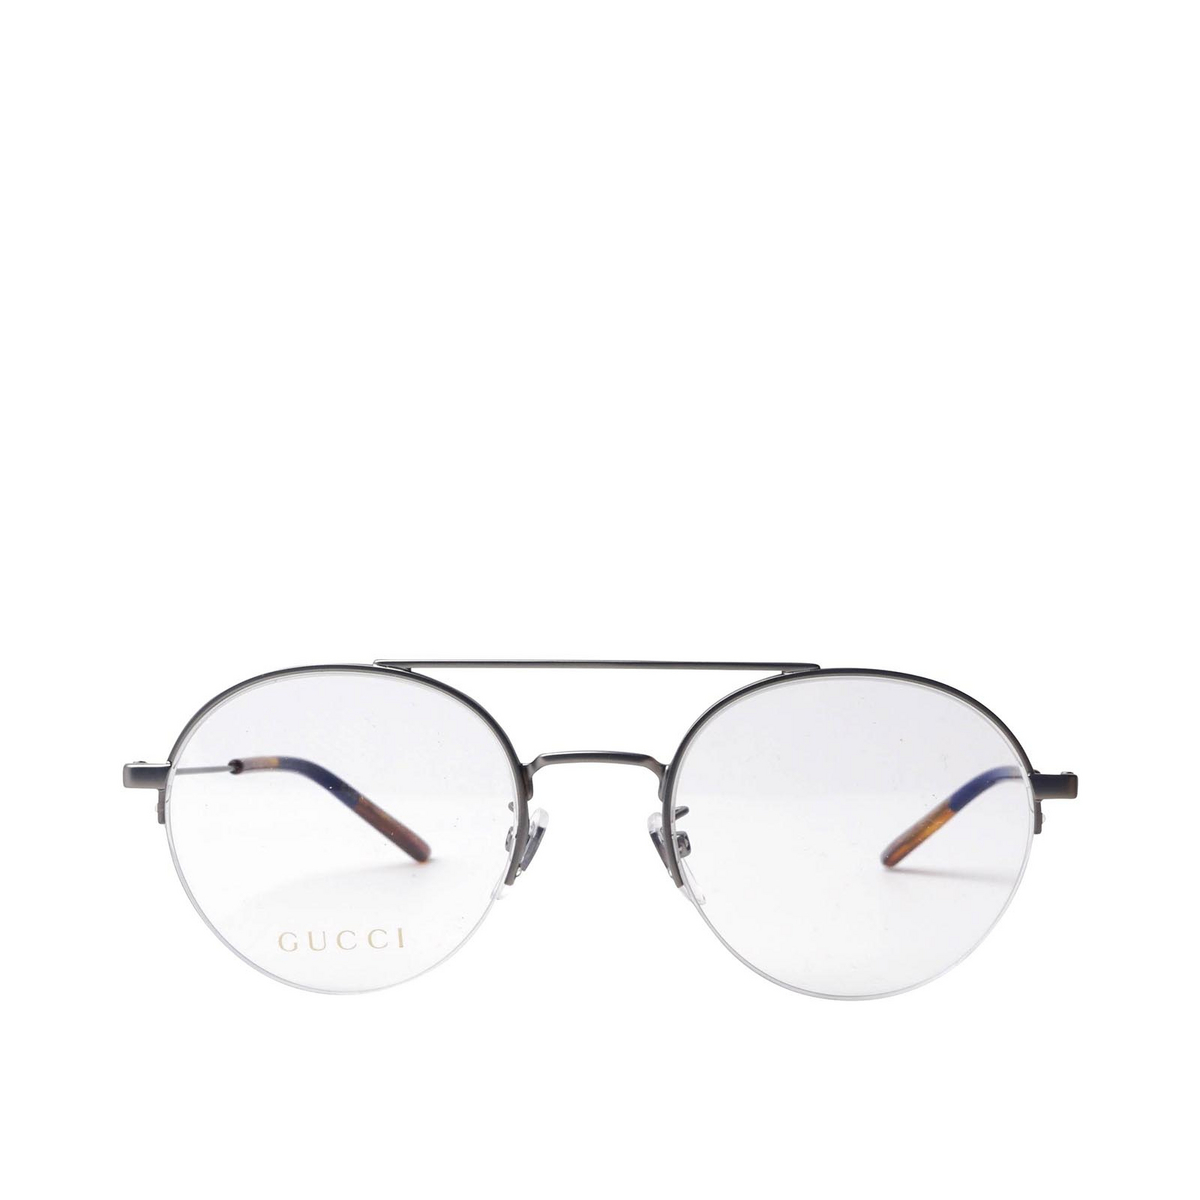 Gucci® Aviator Eyeglasses: GG0682O color Ruthenium 004 - front view.